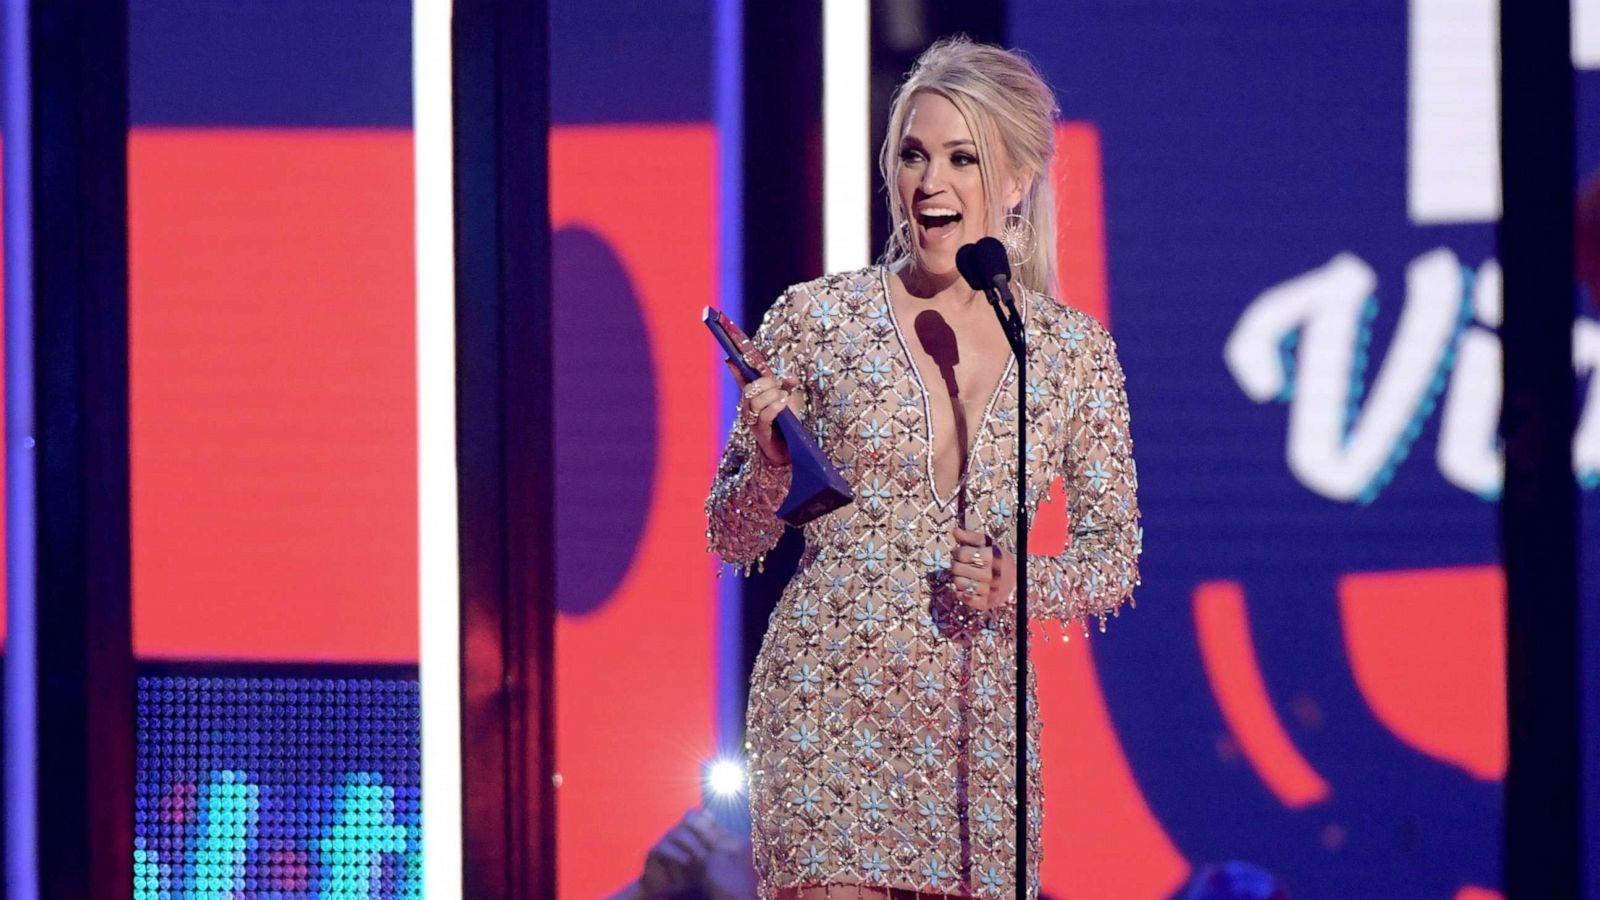 Carrie Underwood dominates CMT Awards, continues reign as country's